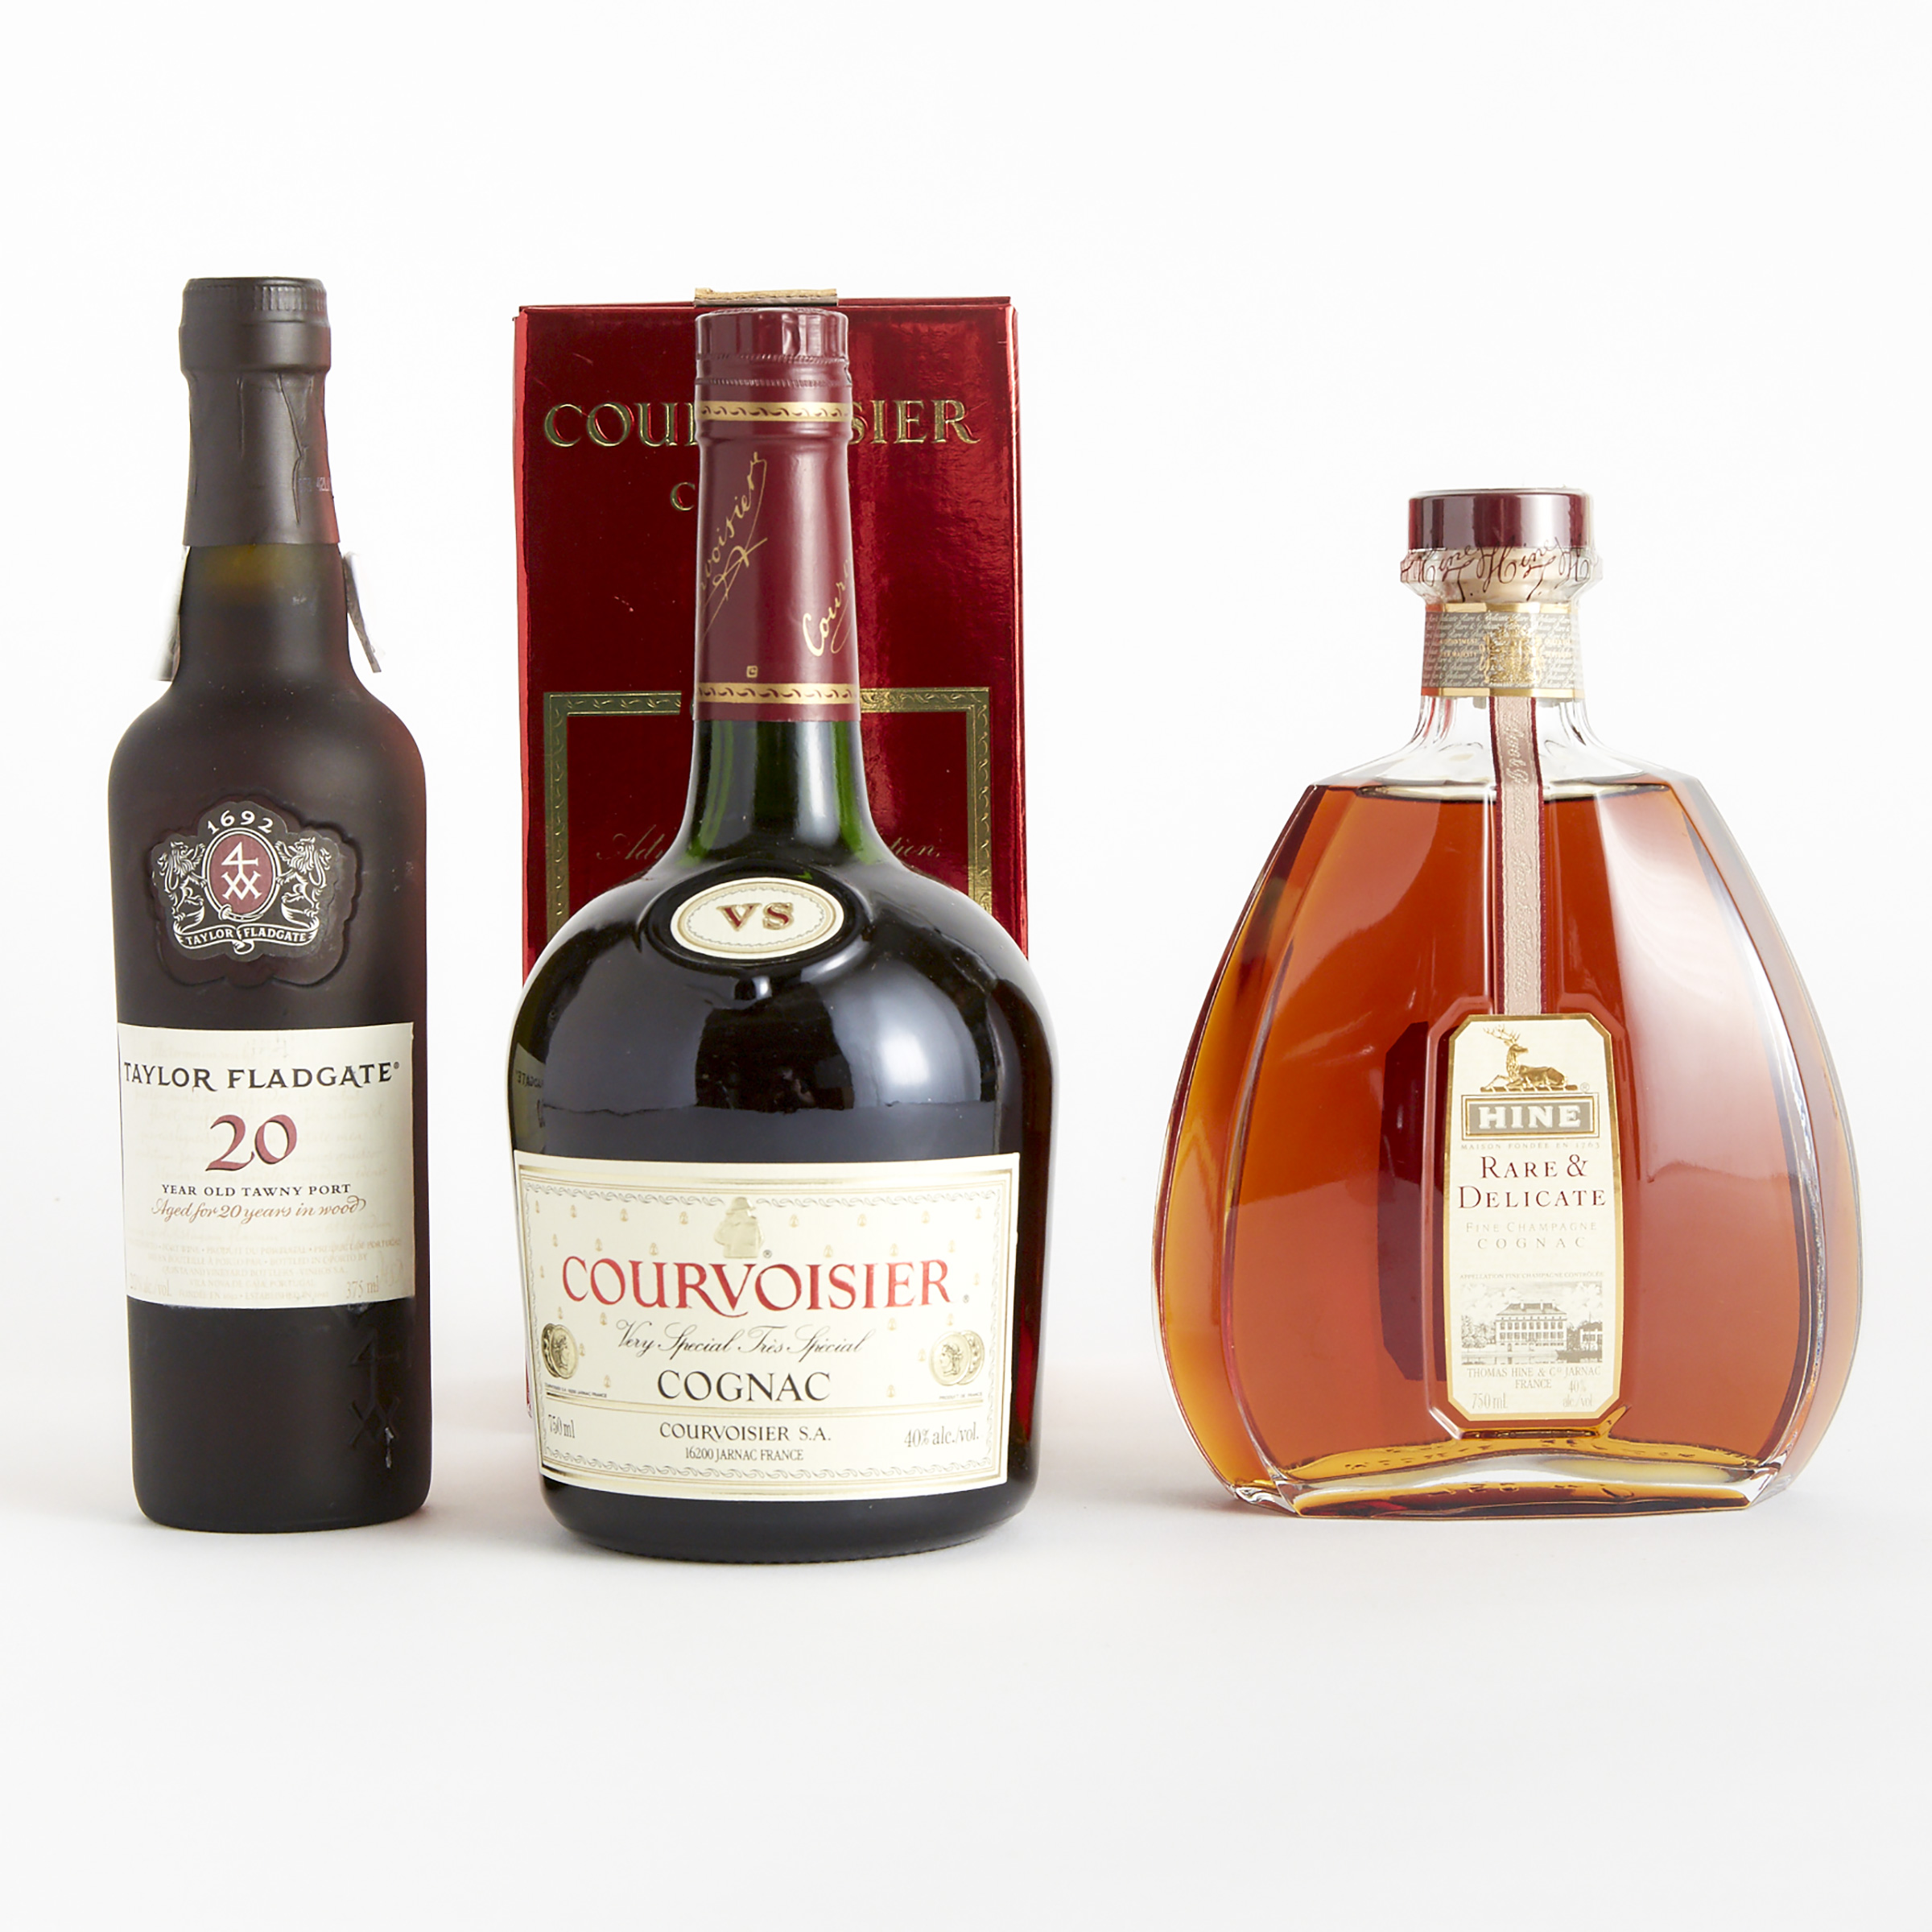 COURVOISIER COGNAC VS (ONE 750 ML)
HINE RARE & DELICATE FINE CHAMPAGNE COGNAC (ONE 750 ML)
TAYLOR FLADGATE 20 YEAR OLD TAWNY PORT 20 YEARS (ONE 375 ML)